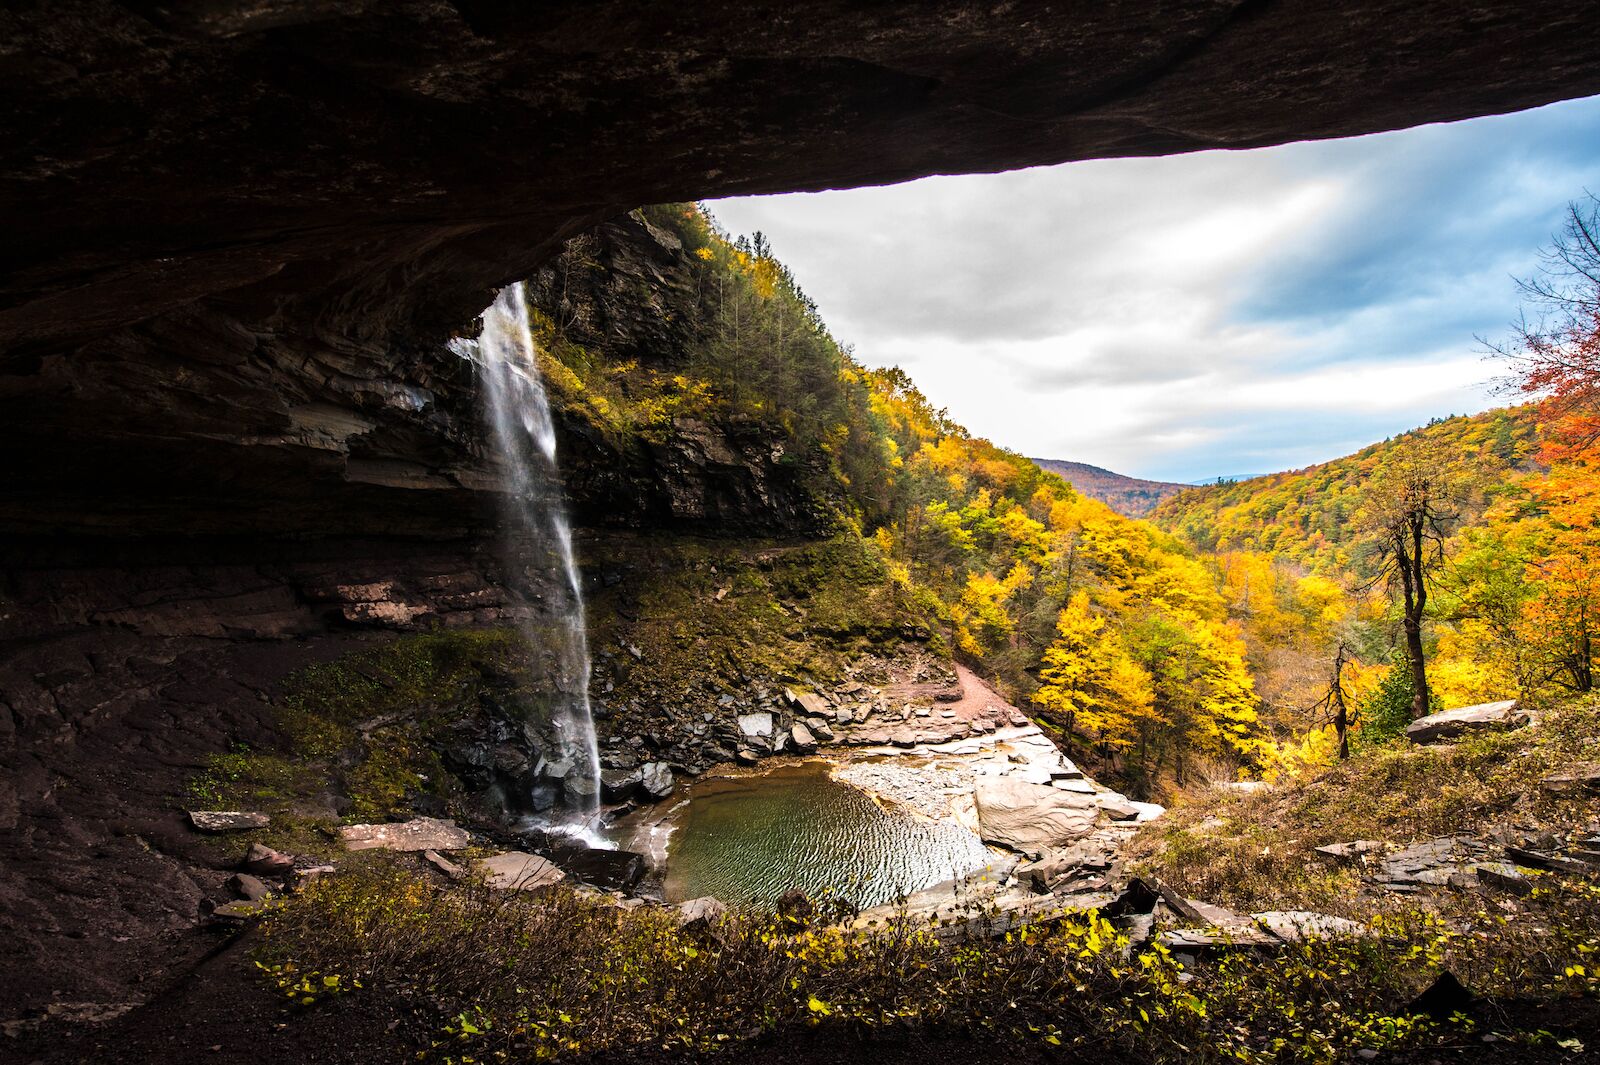 Kaaterskill falls waterfall in the New York Catskill mountains